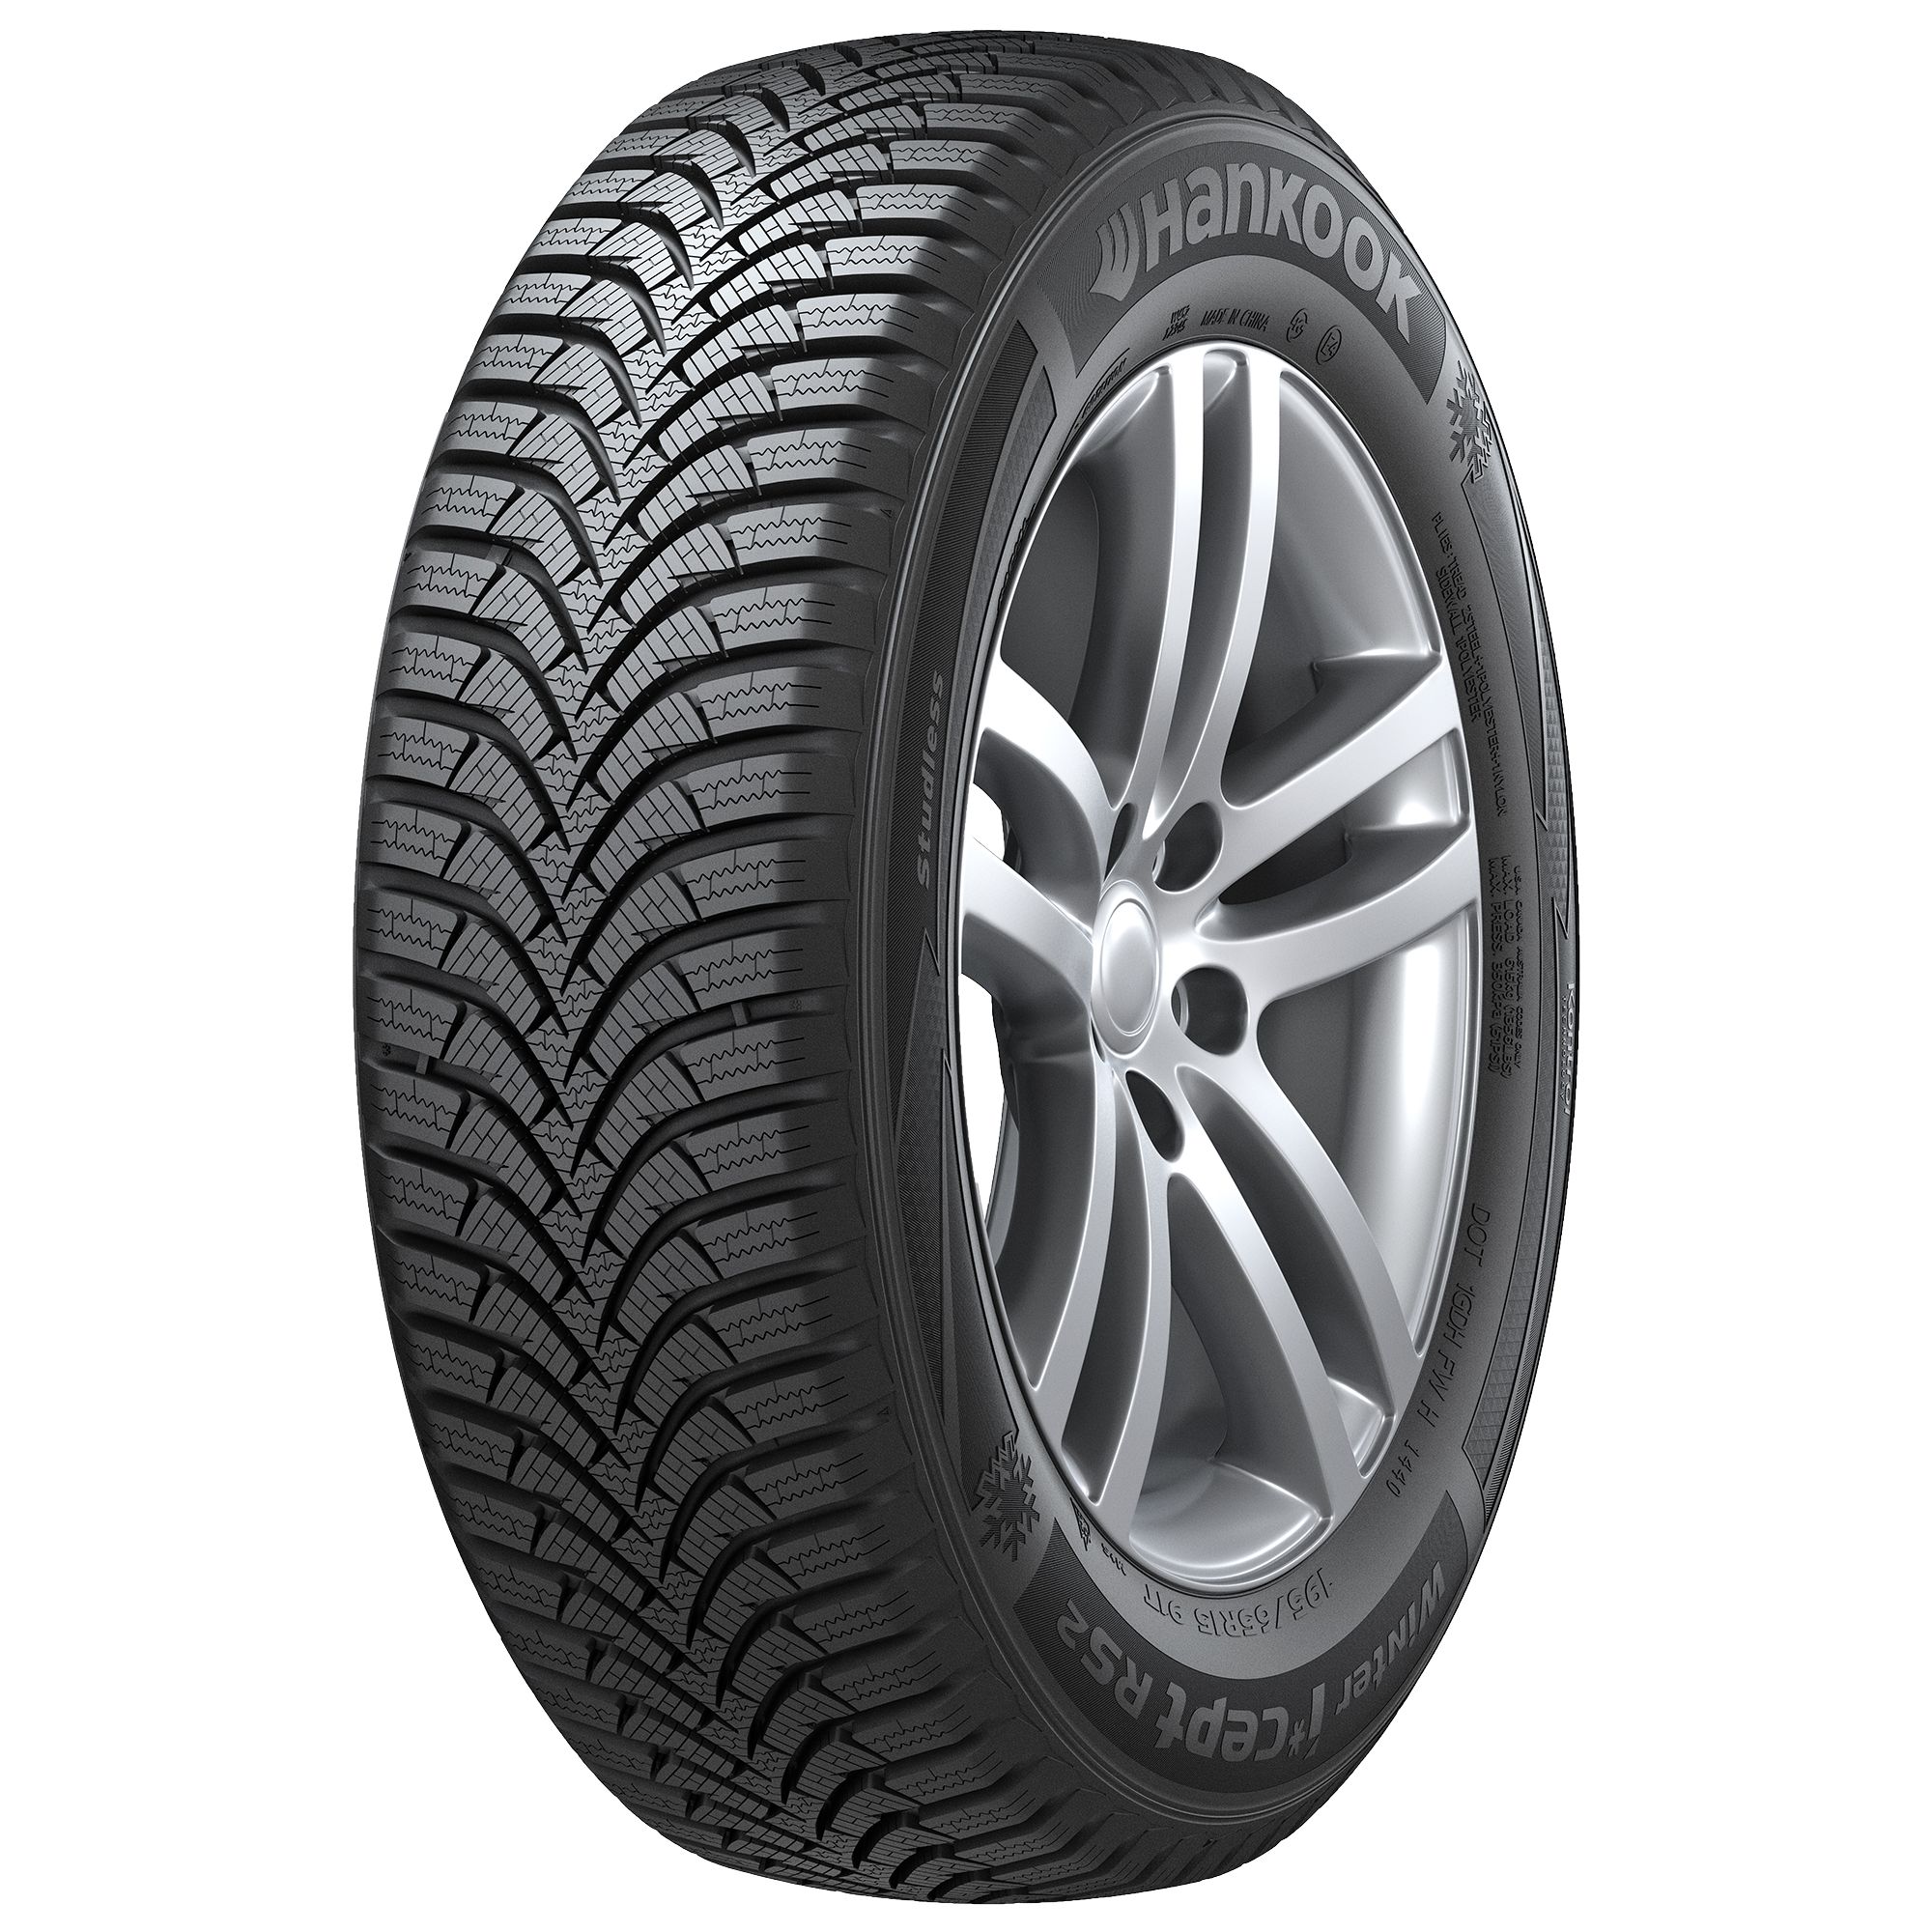 HANKOOK WINTER I*CEPT RS2 (W452) 205/55R16 91H BSW